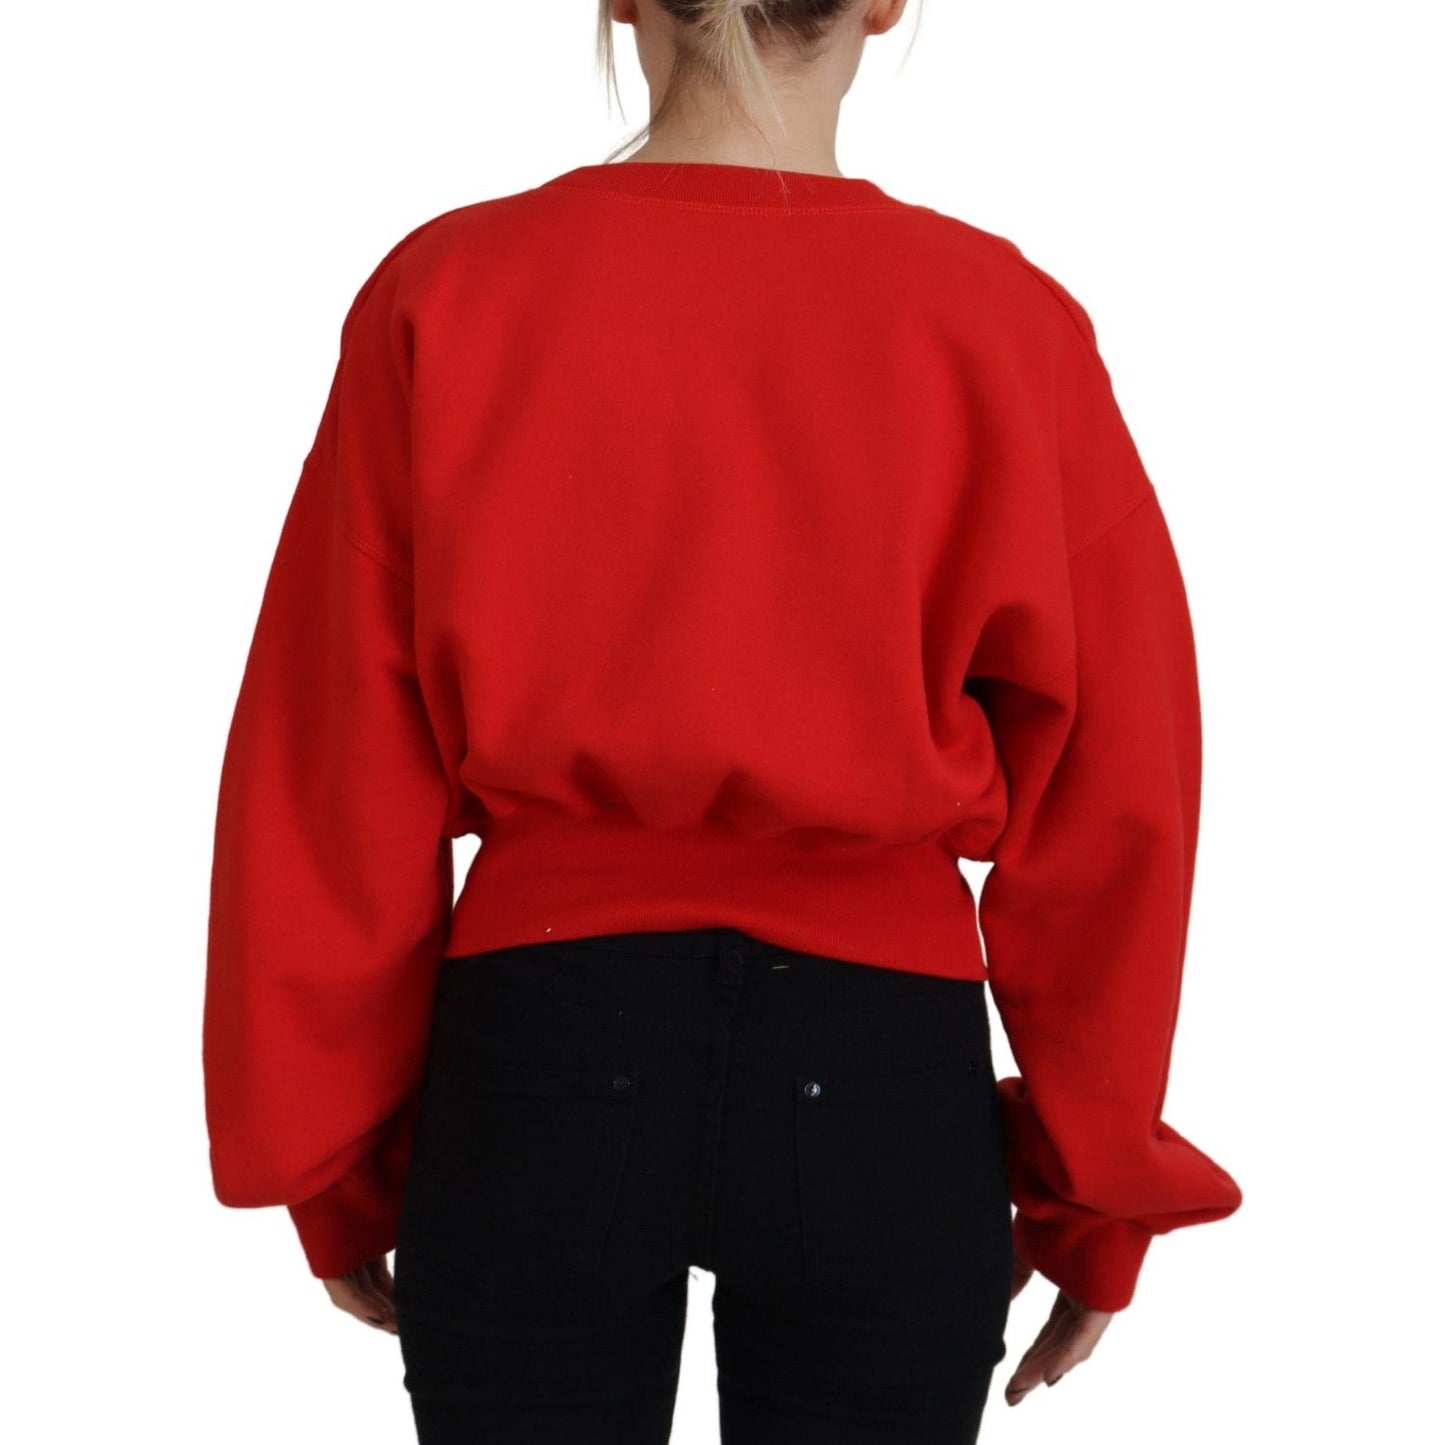 Dsquared² Red Logo Print Women Crew Neck Long Sleeve Sweater red-logo-print-women-crew-neck-long-sleeve-sweater